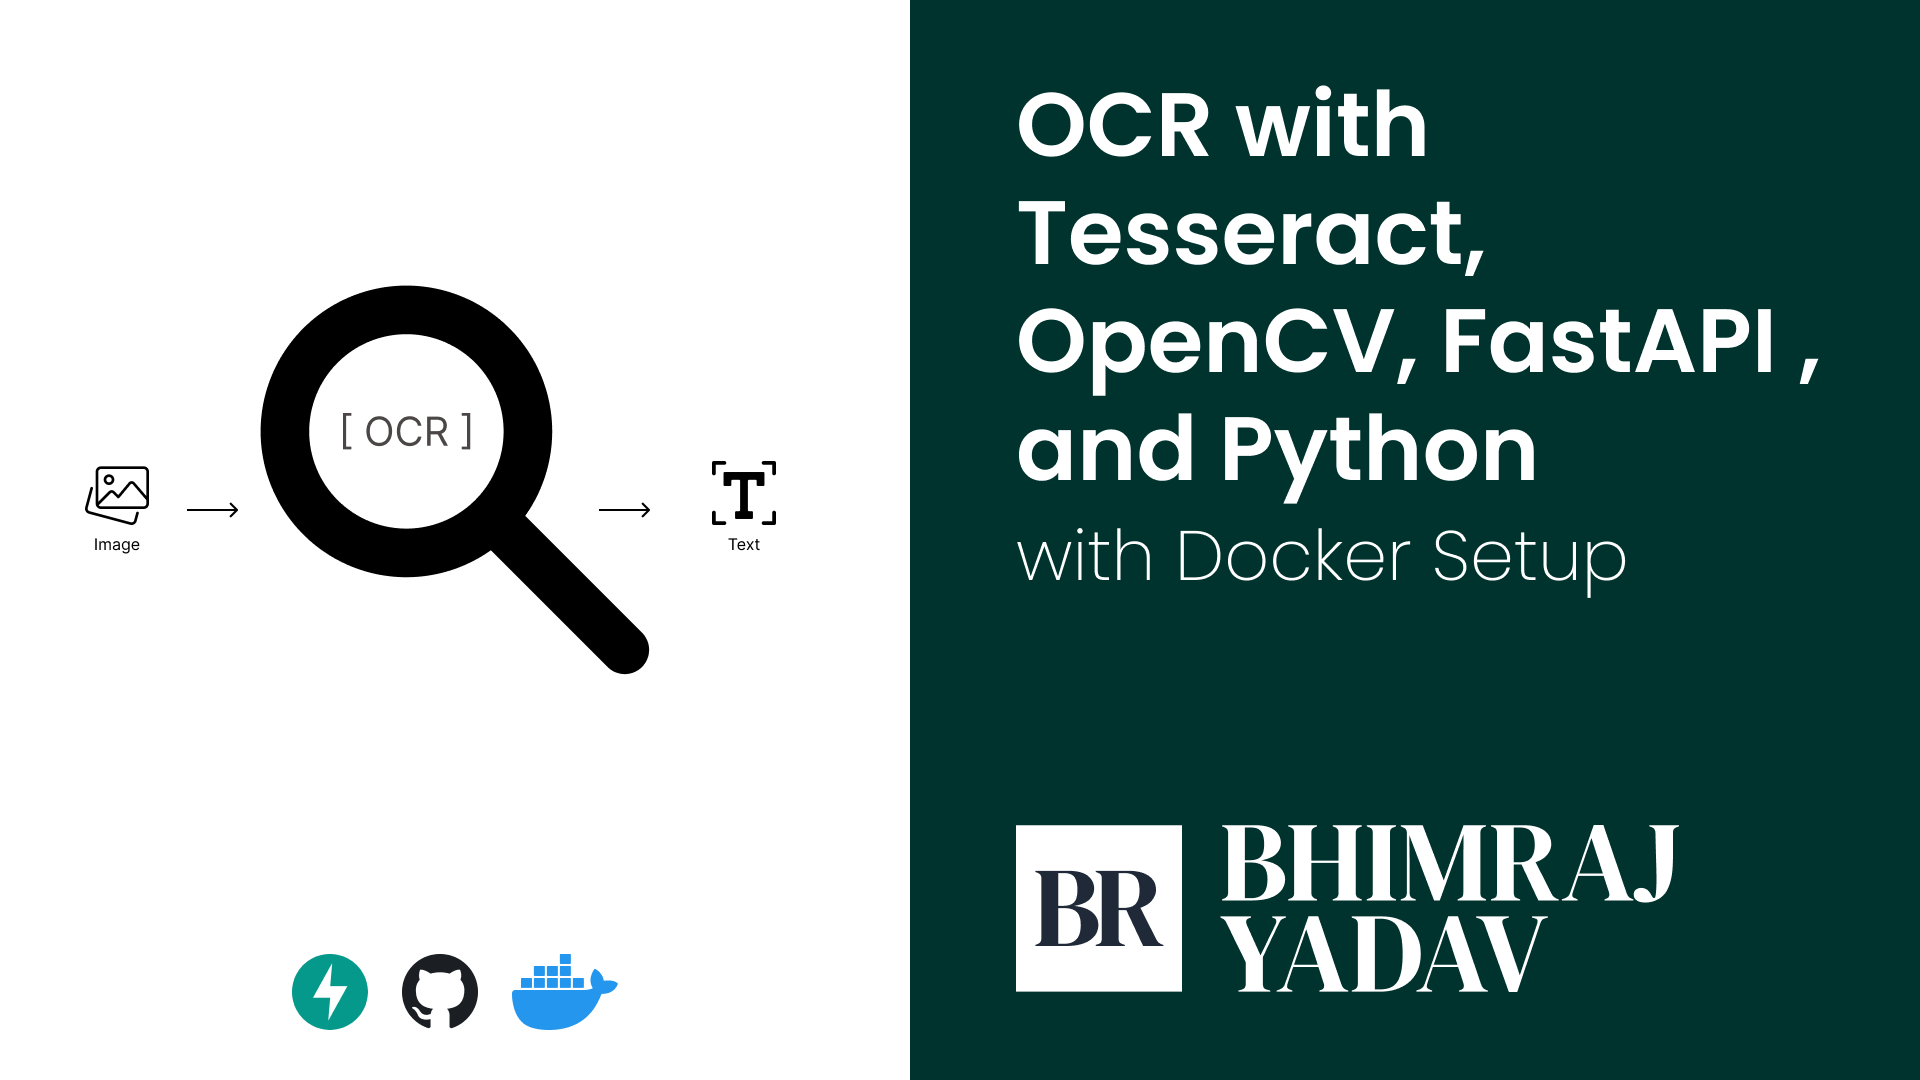 How to OCR with Tesseract, OpenCV, FastAPI , and Python